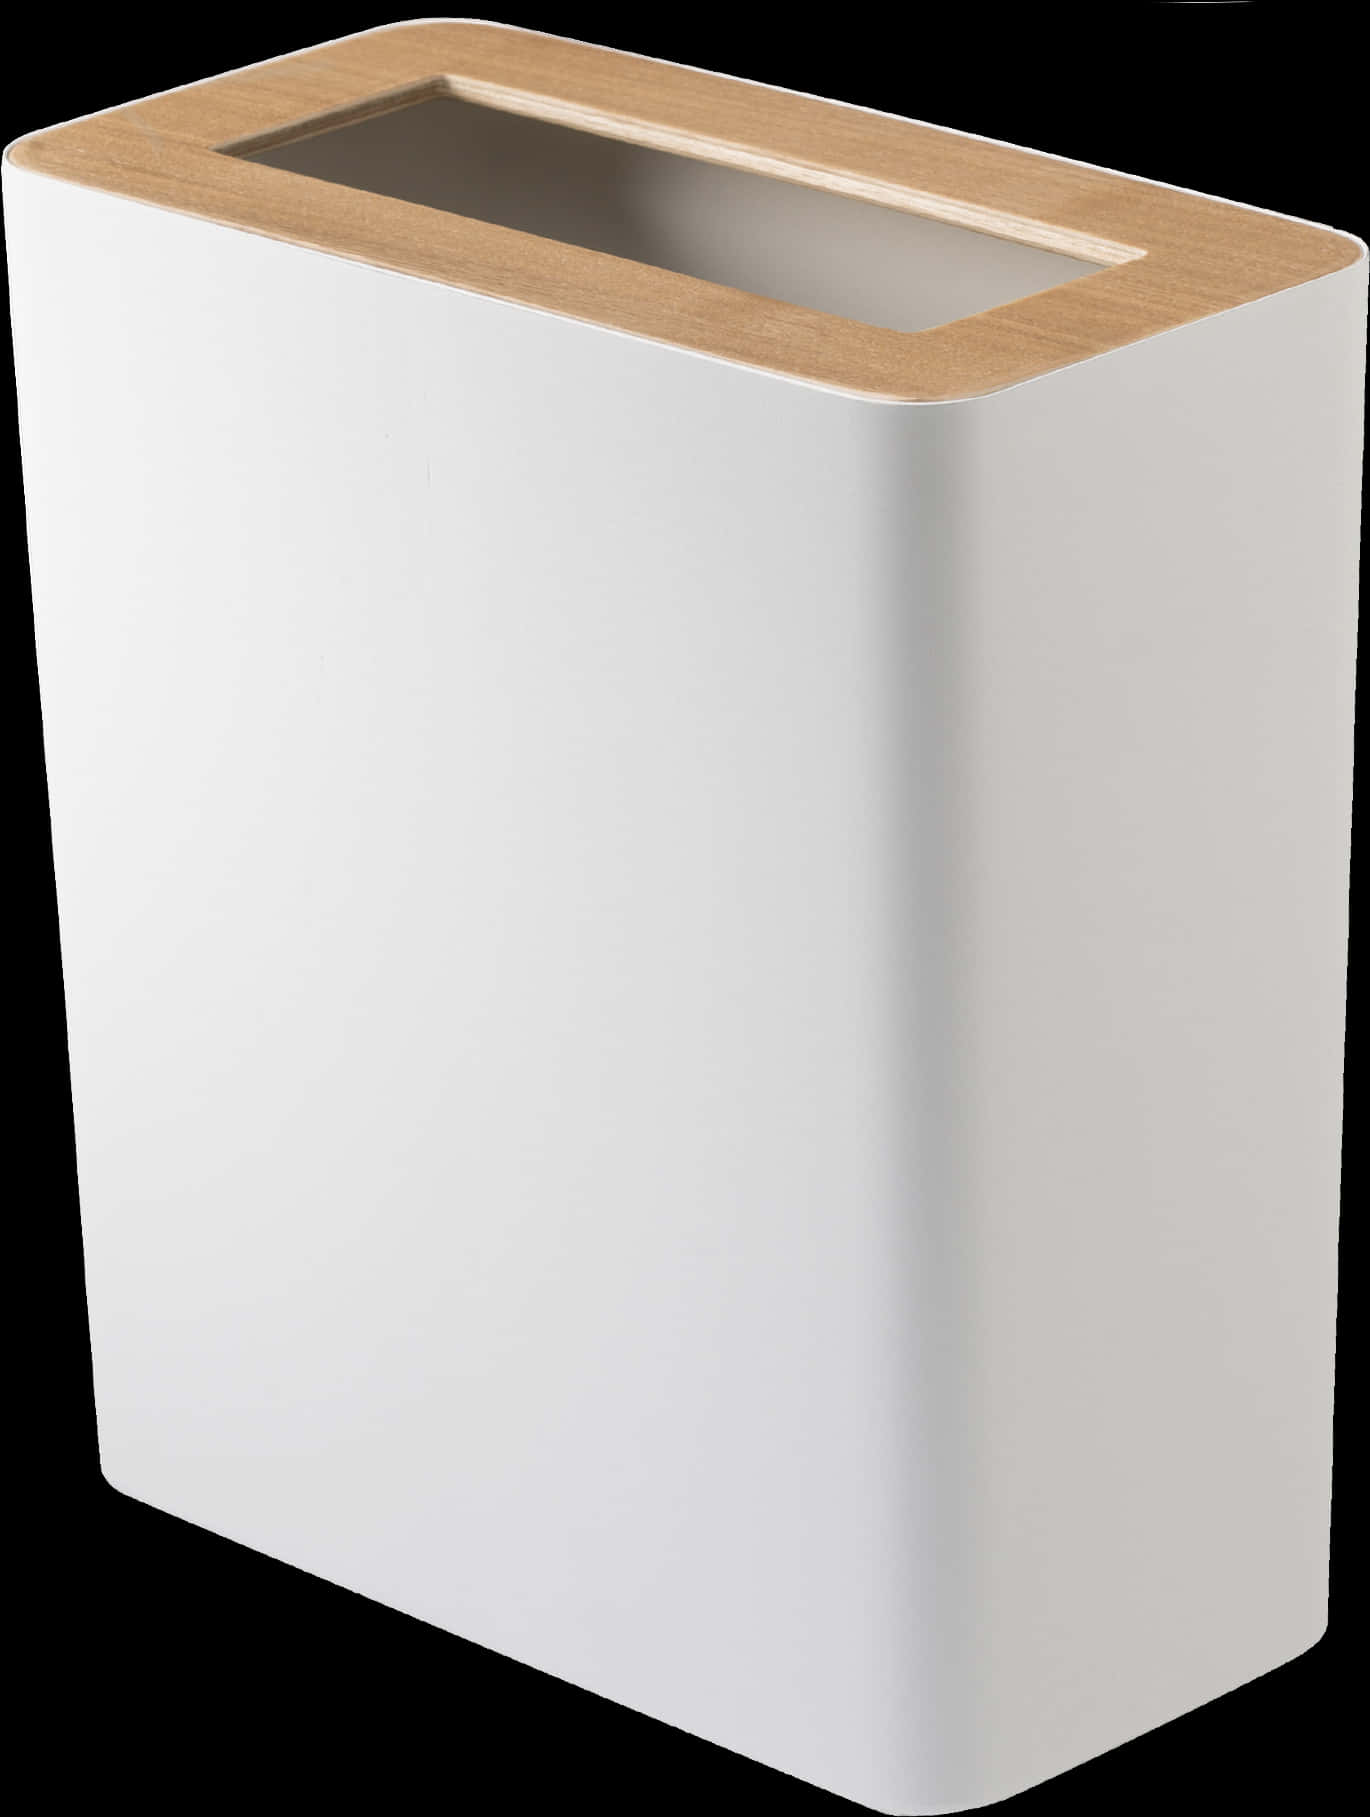 A White Rectangular Object With A Wooden Edge